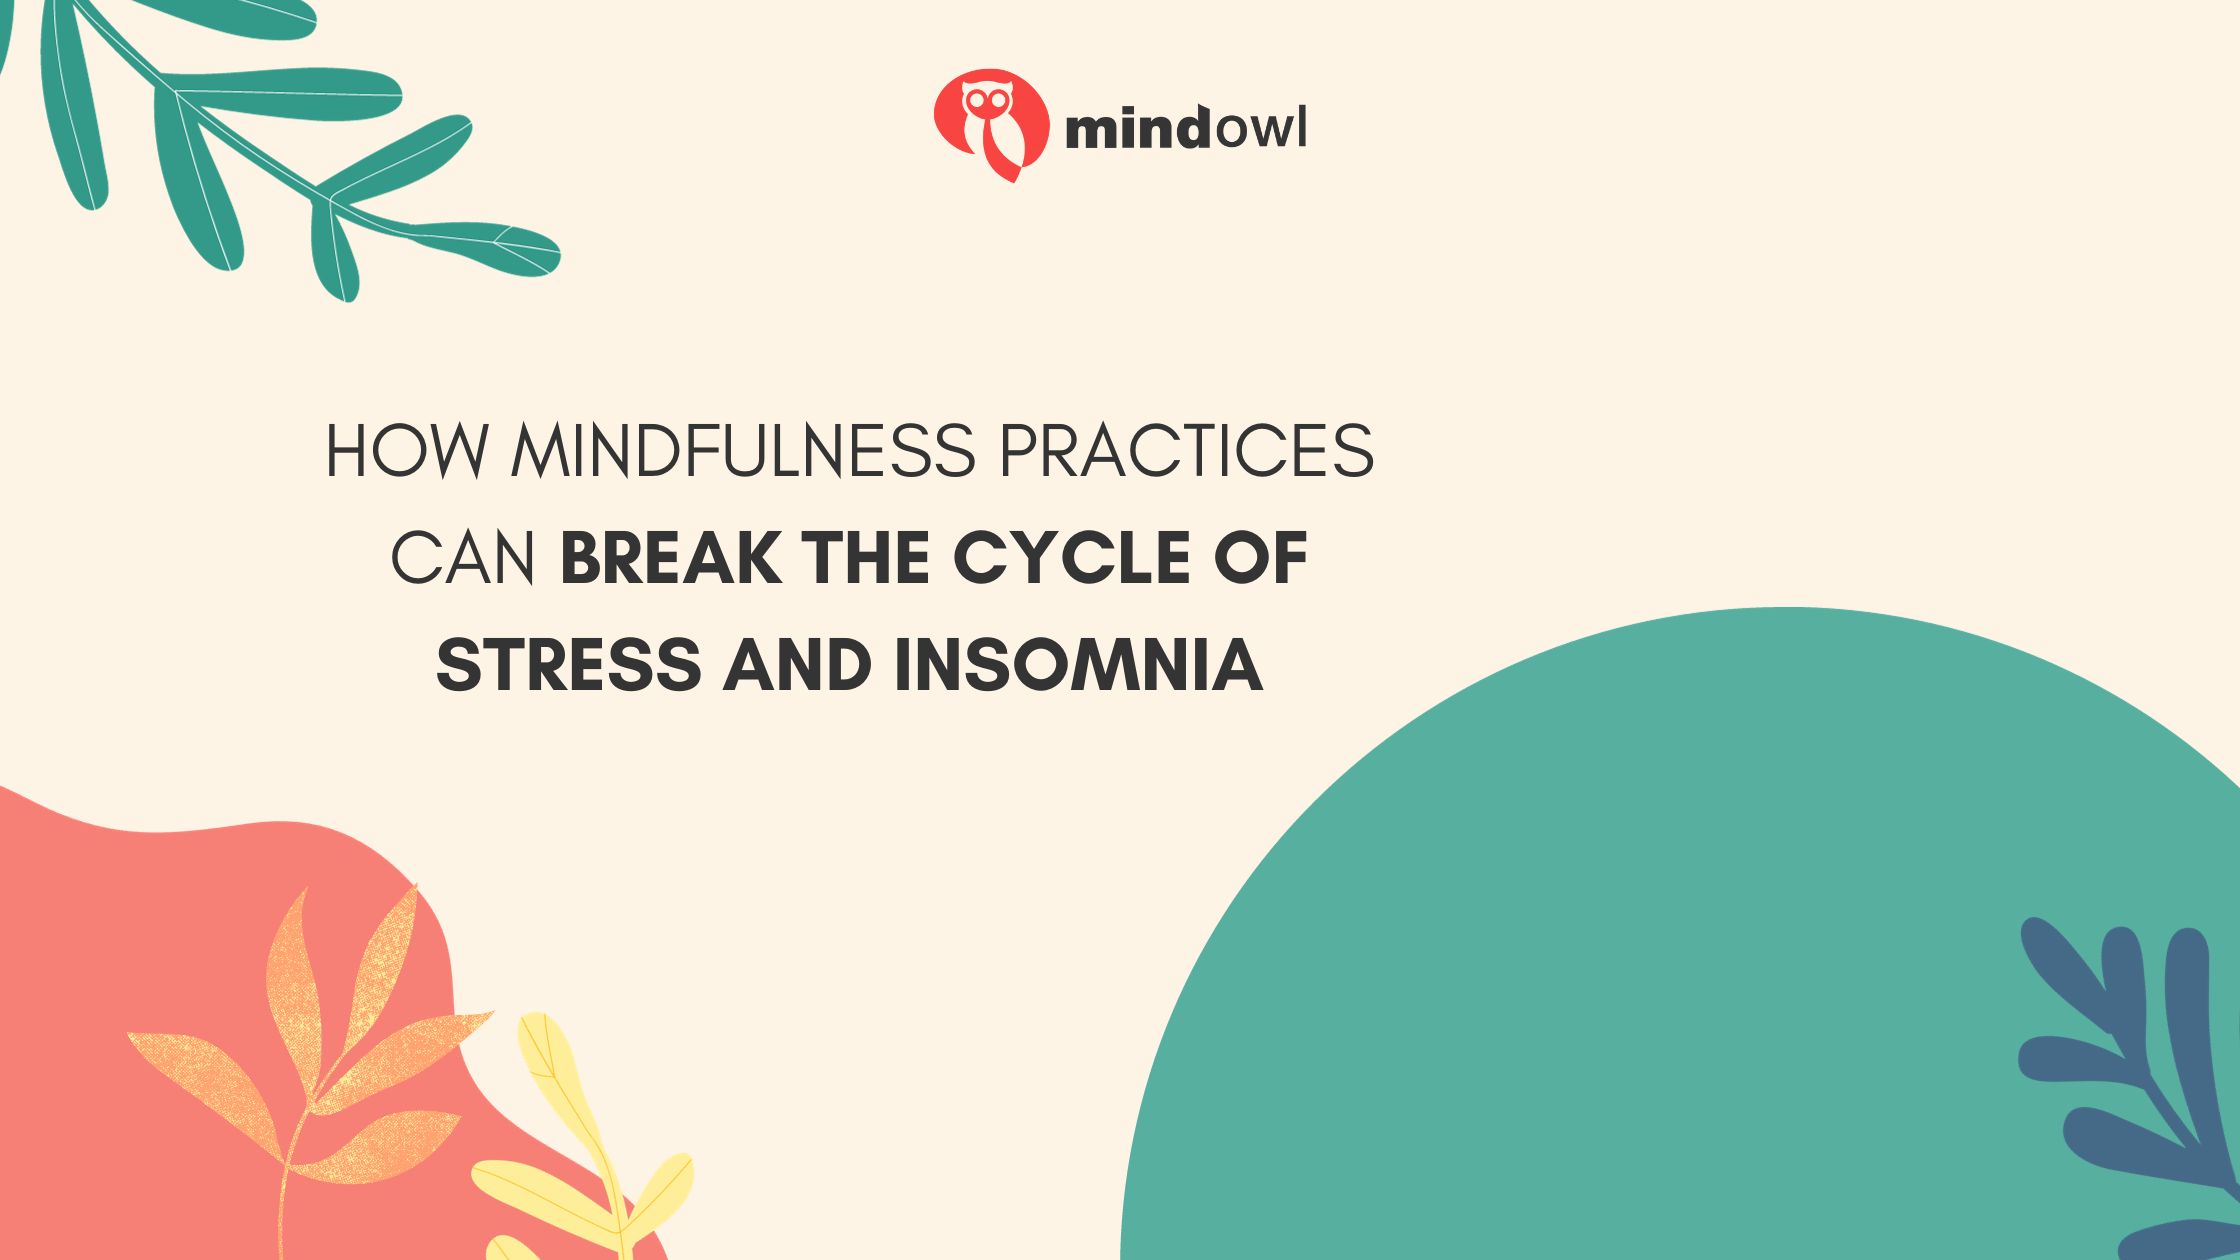 How Mindfulness Practices Can Break the Cycle of Stress and Insomnia